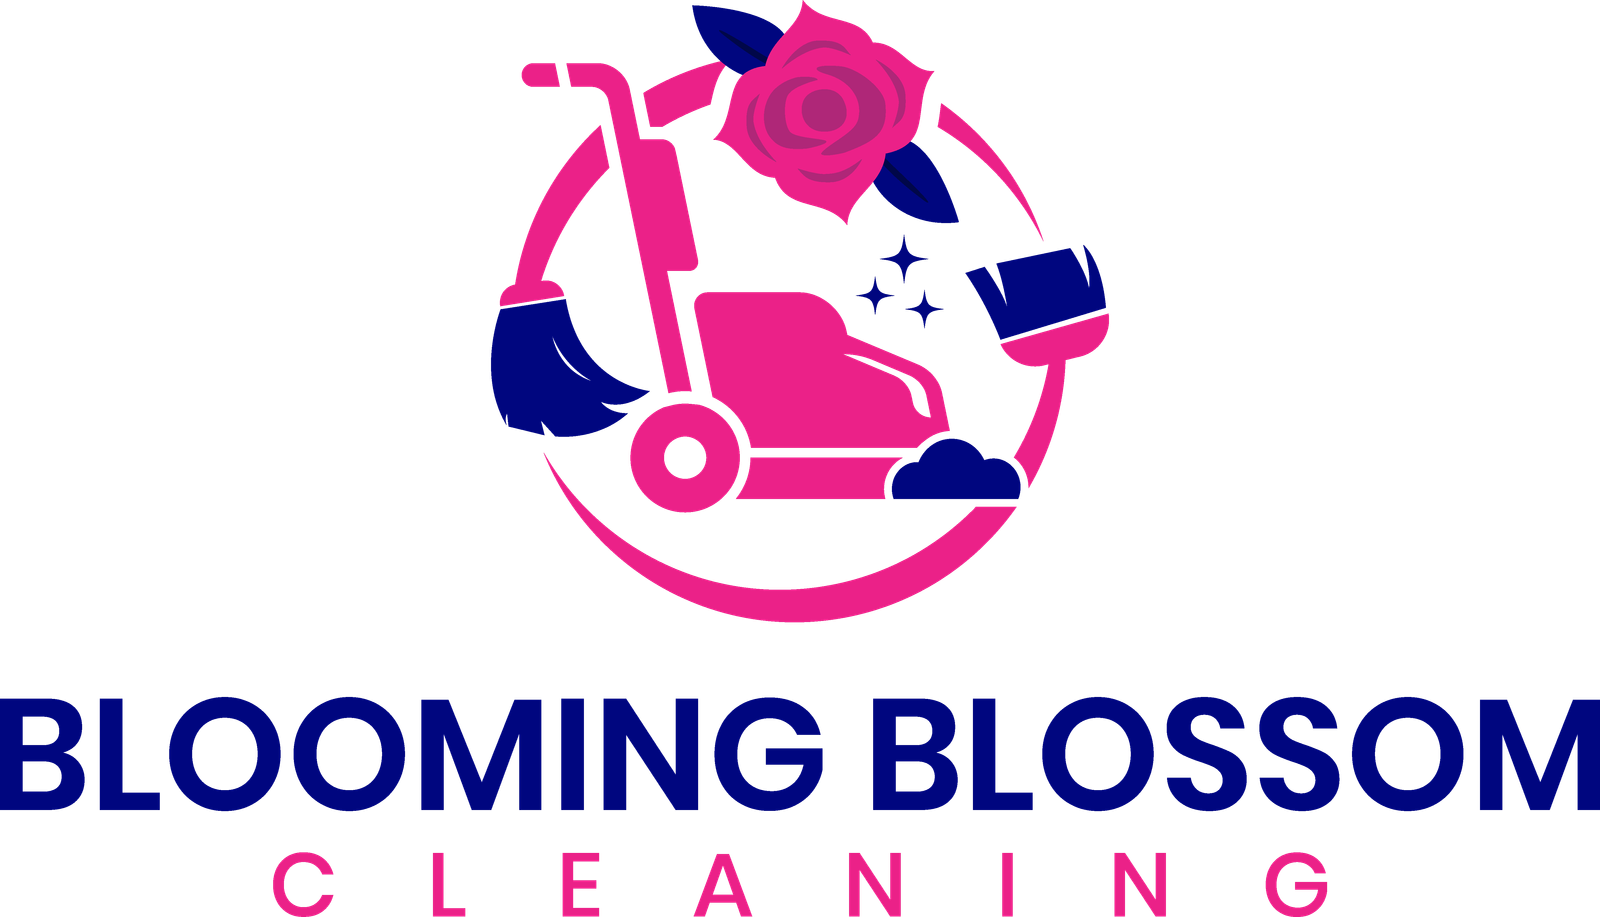 blooming blossom cleaning logo